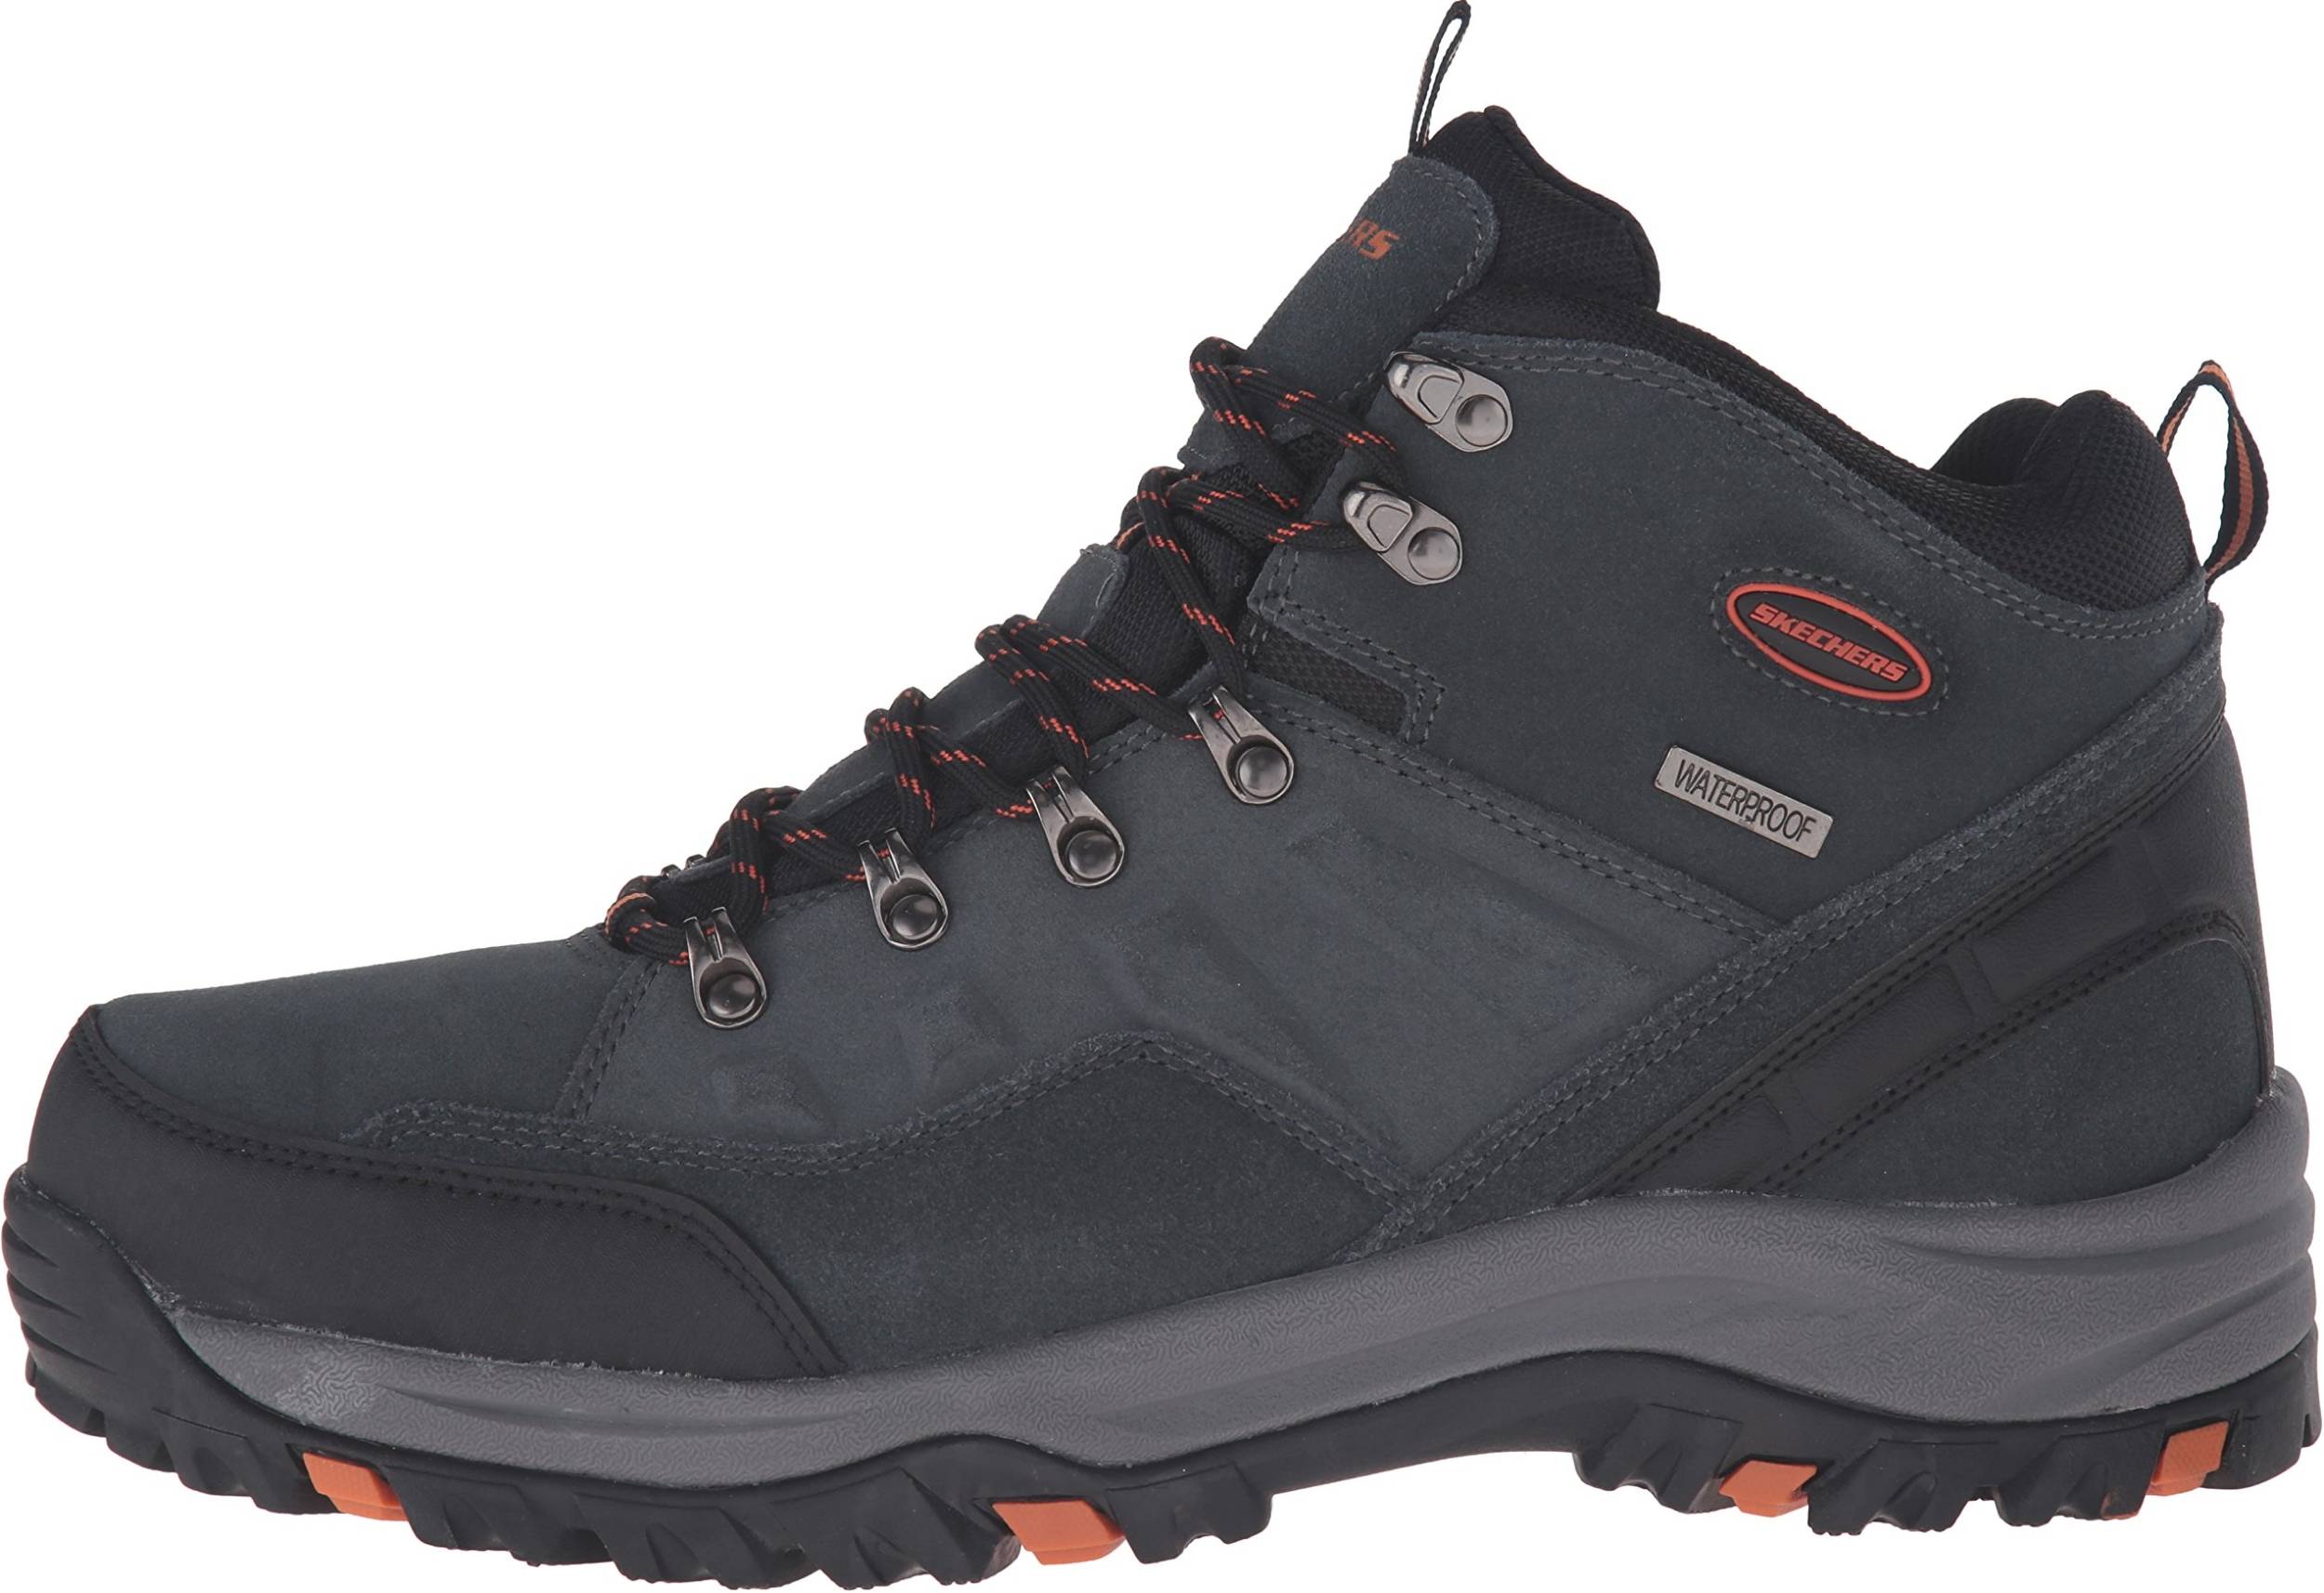 Save 40% on Skechers Hiking Boots (2 